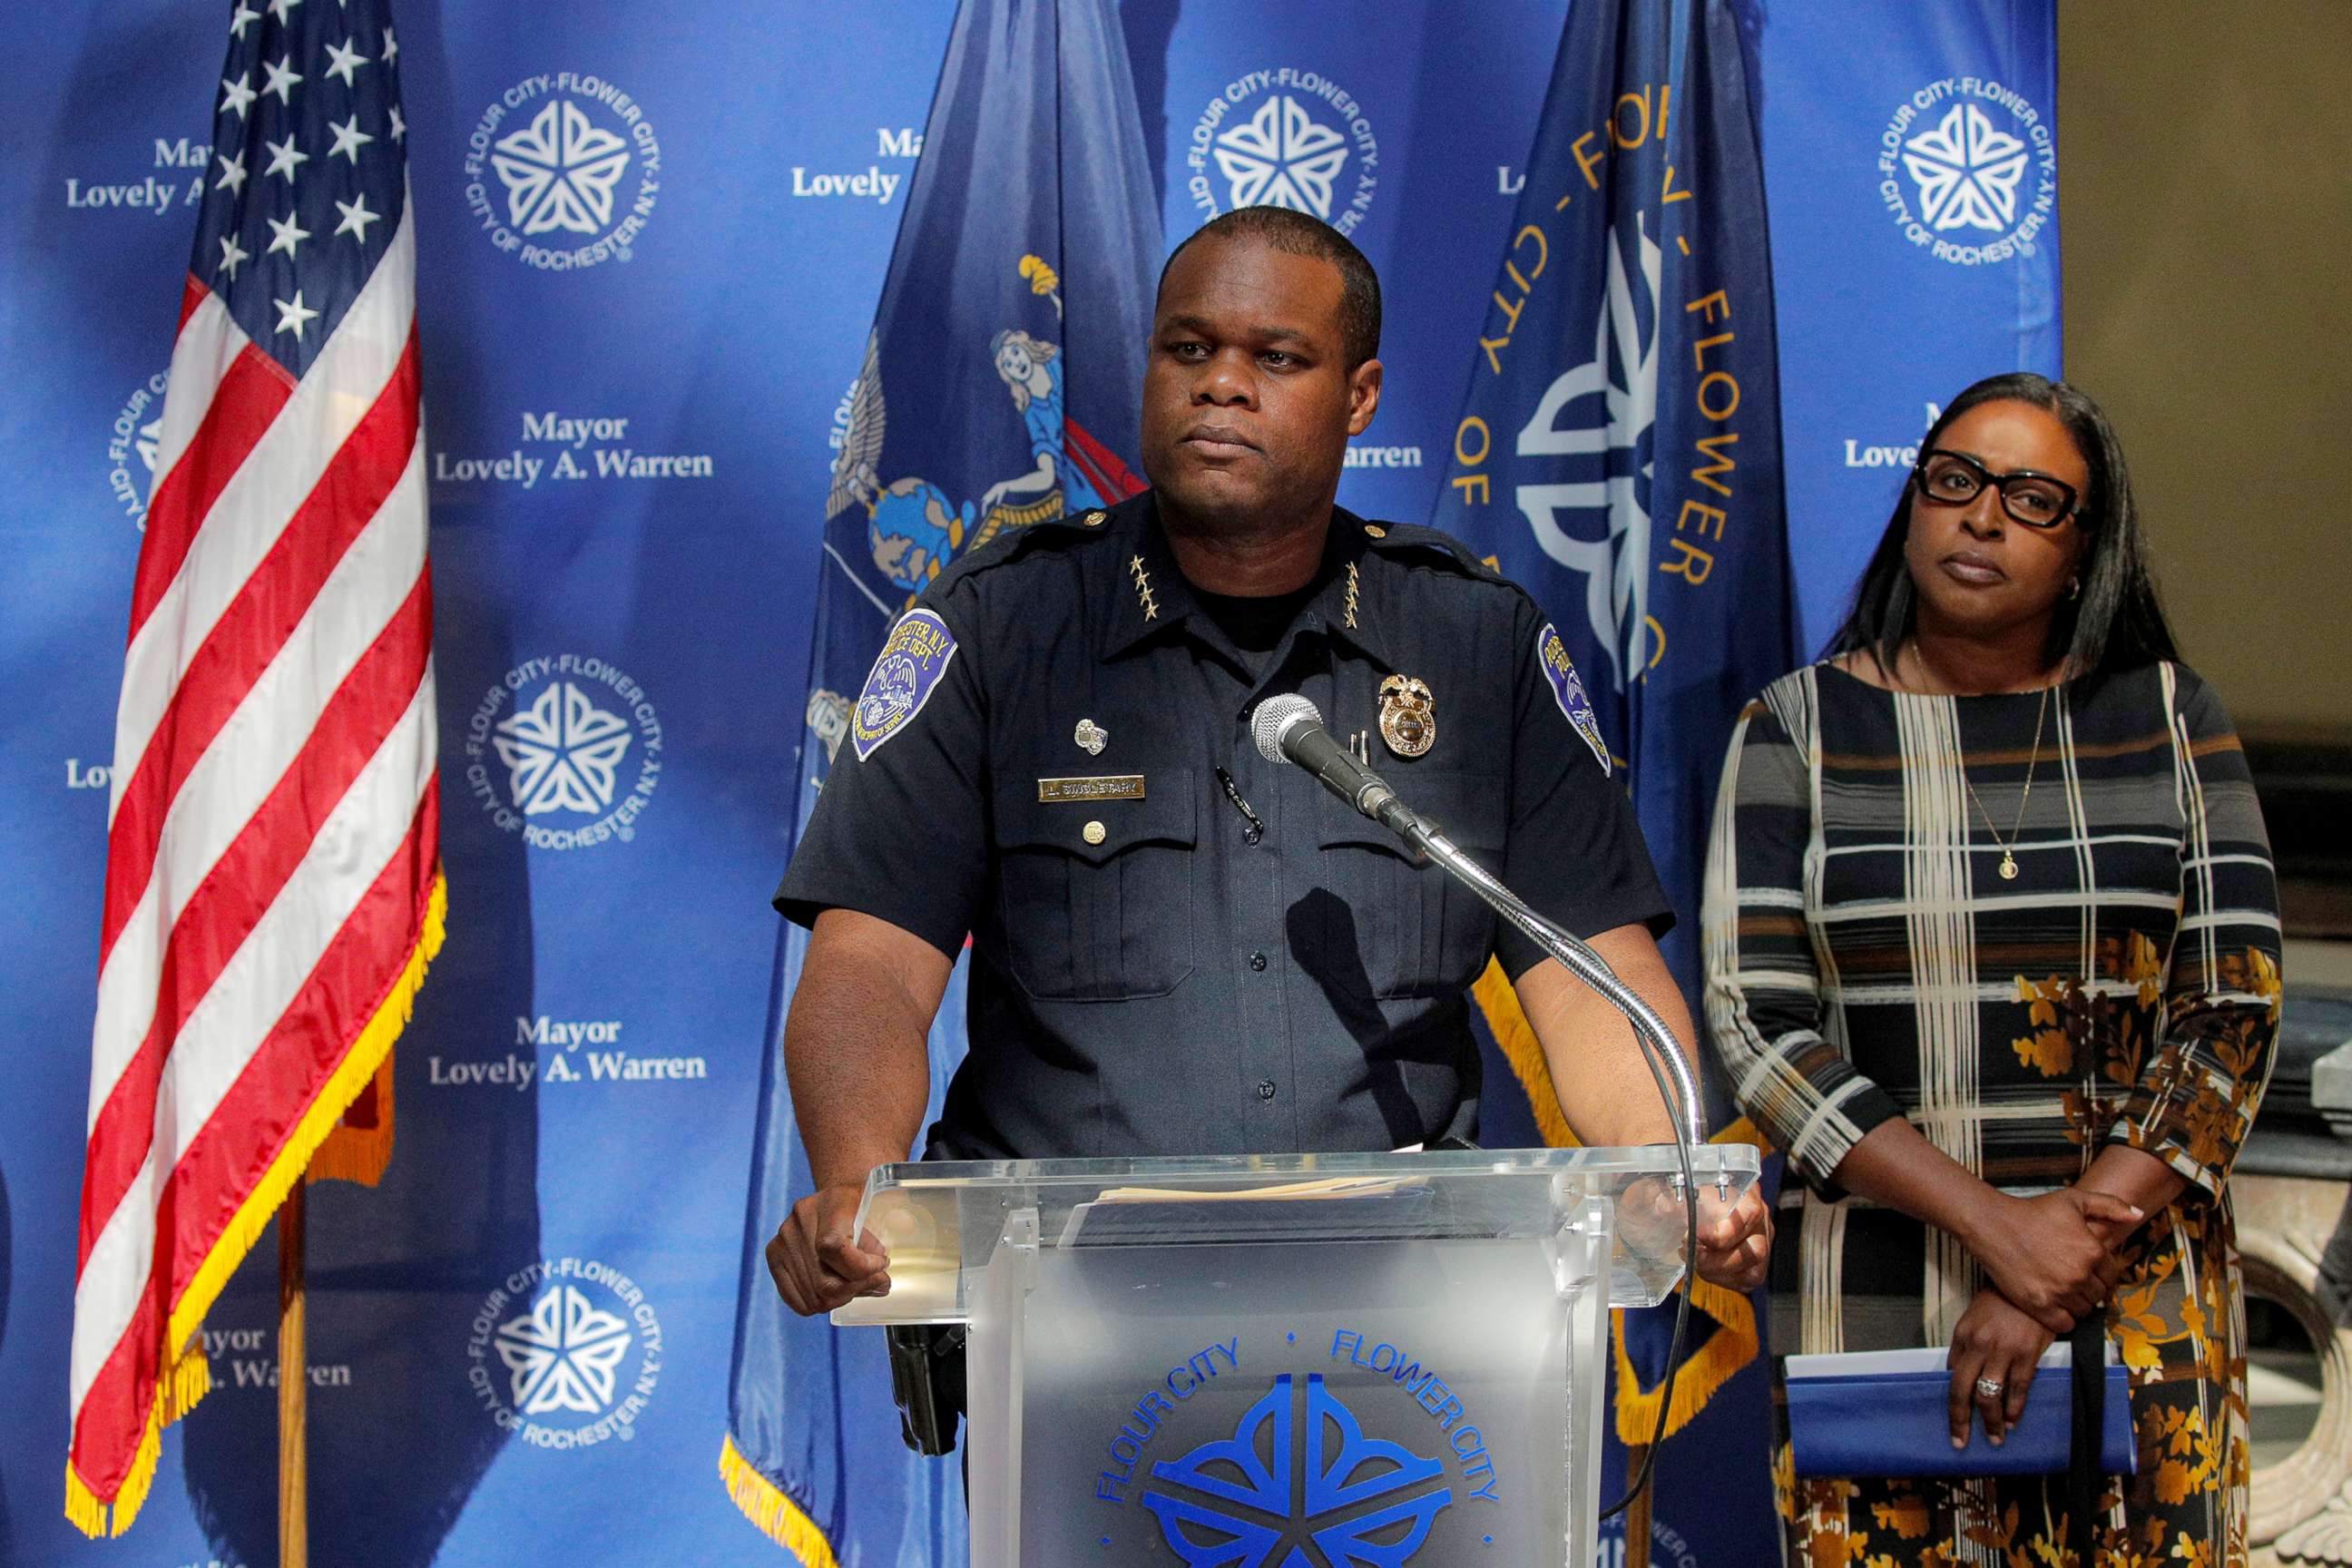 PHOTO: Rochester Police Chief, La'Ron Singletary speaks during a news conference with Mayor Lovely Warren regarding the protests over the death of a Black man, Daniel Prude in Rochester, N.Y., Sept. 6, 2020.